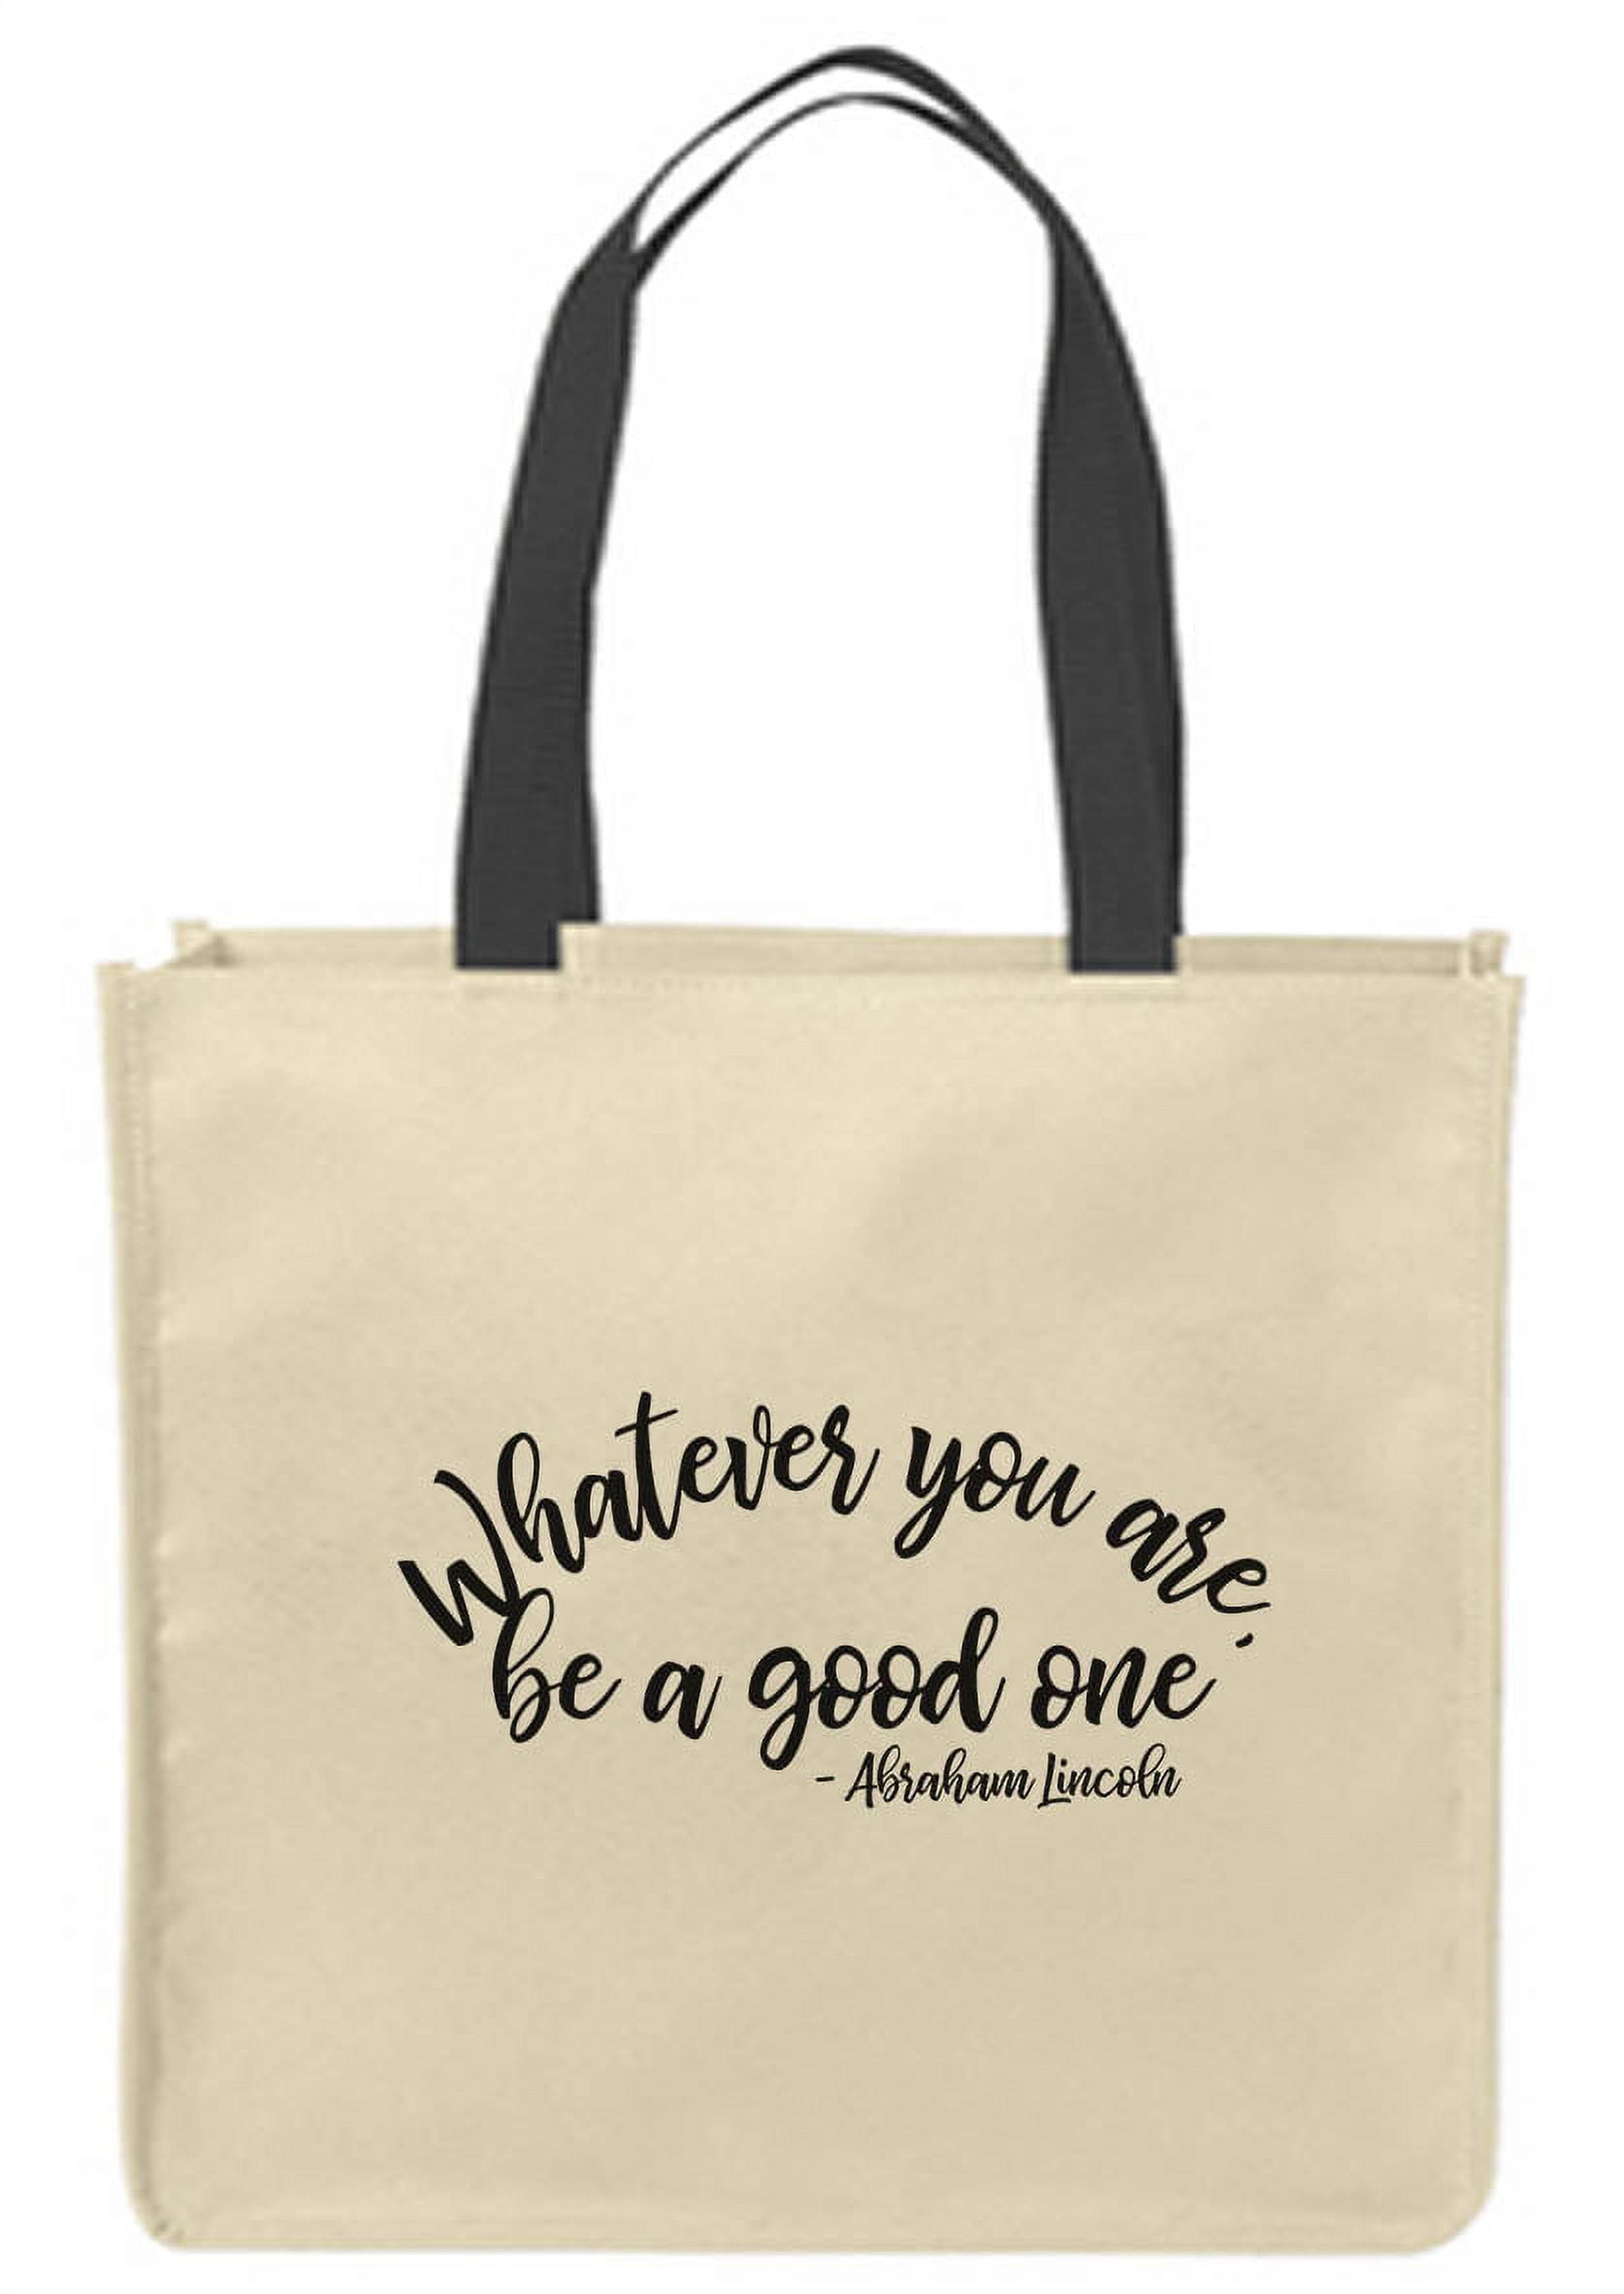 Religious Quotes and Sayings Canvas Tote Bag | Christian Tote Bags | Lord's  Guidance